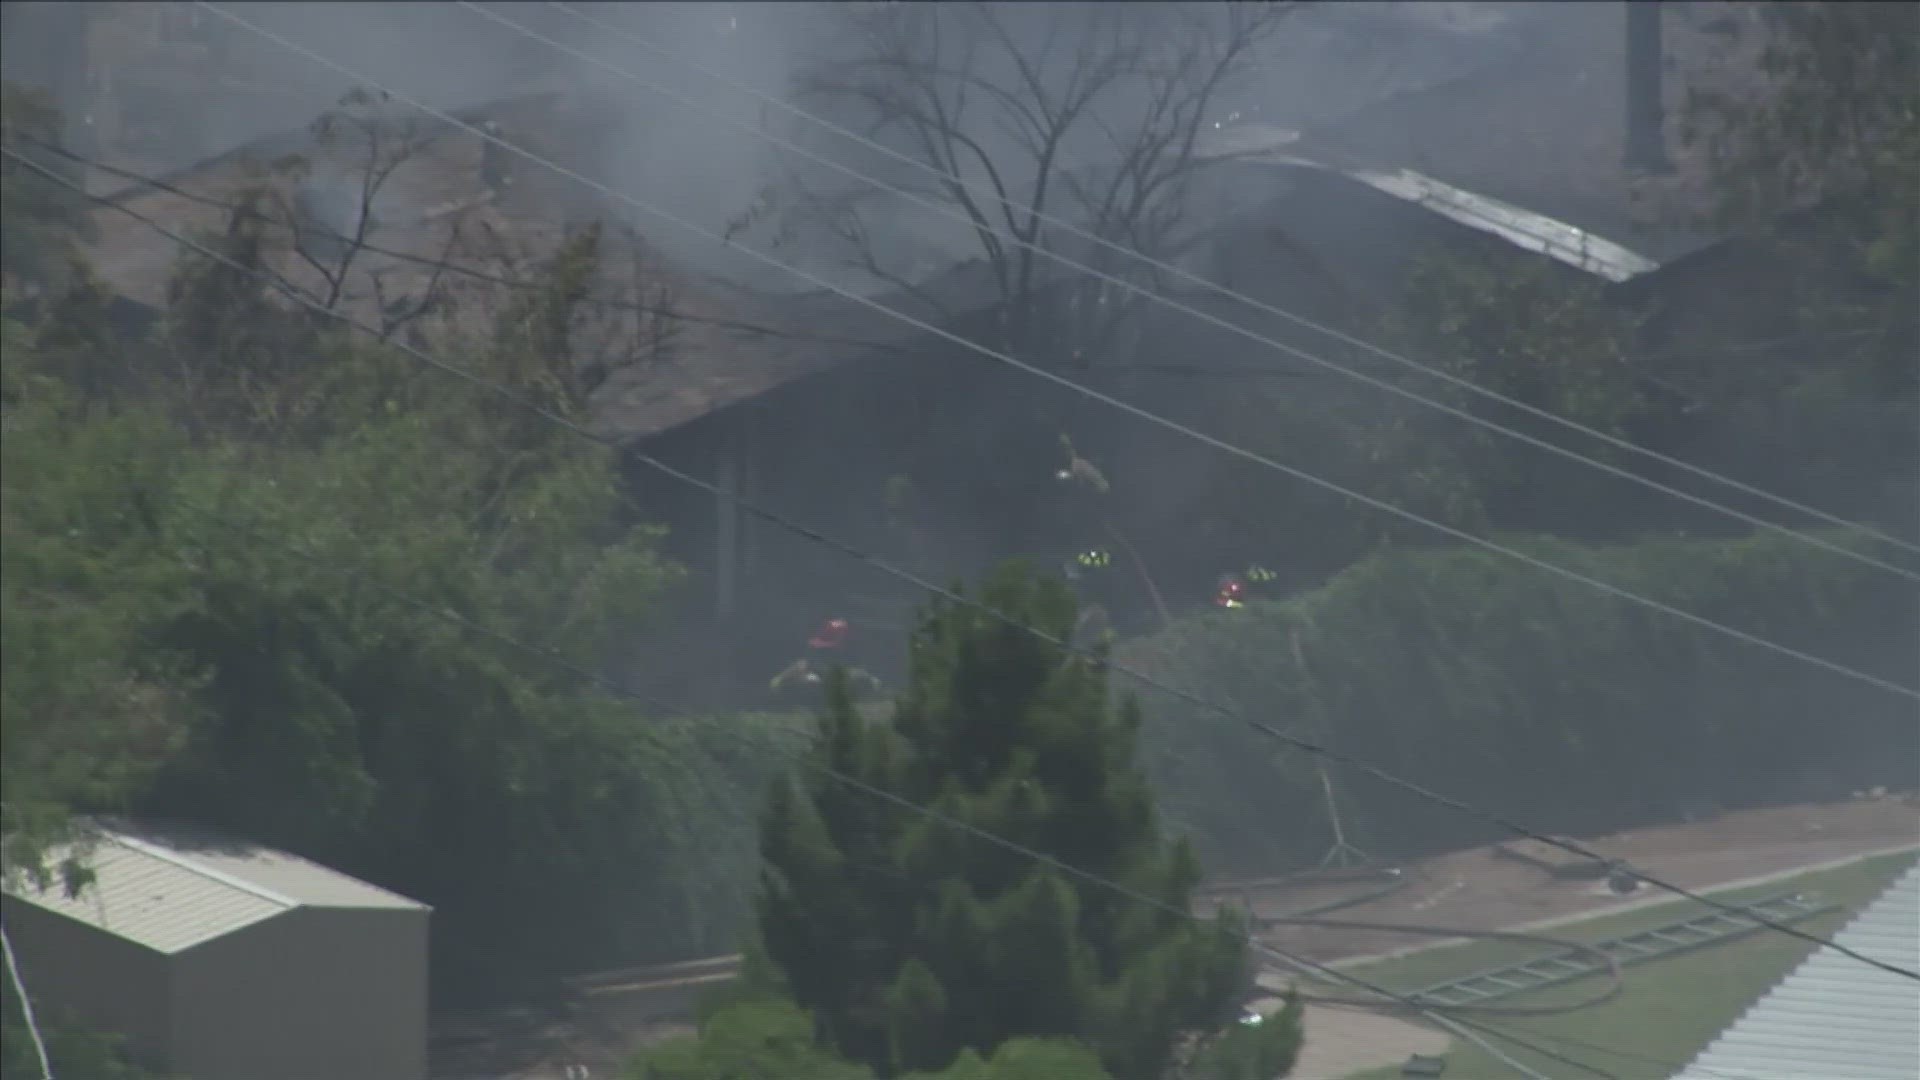 Officials are investigating a fatal house fire reported near Main Street and Sossaman Road.